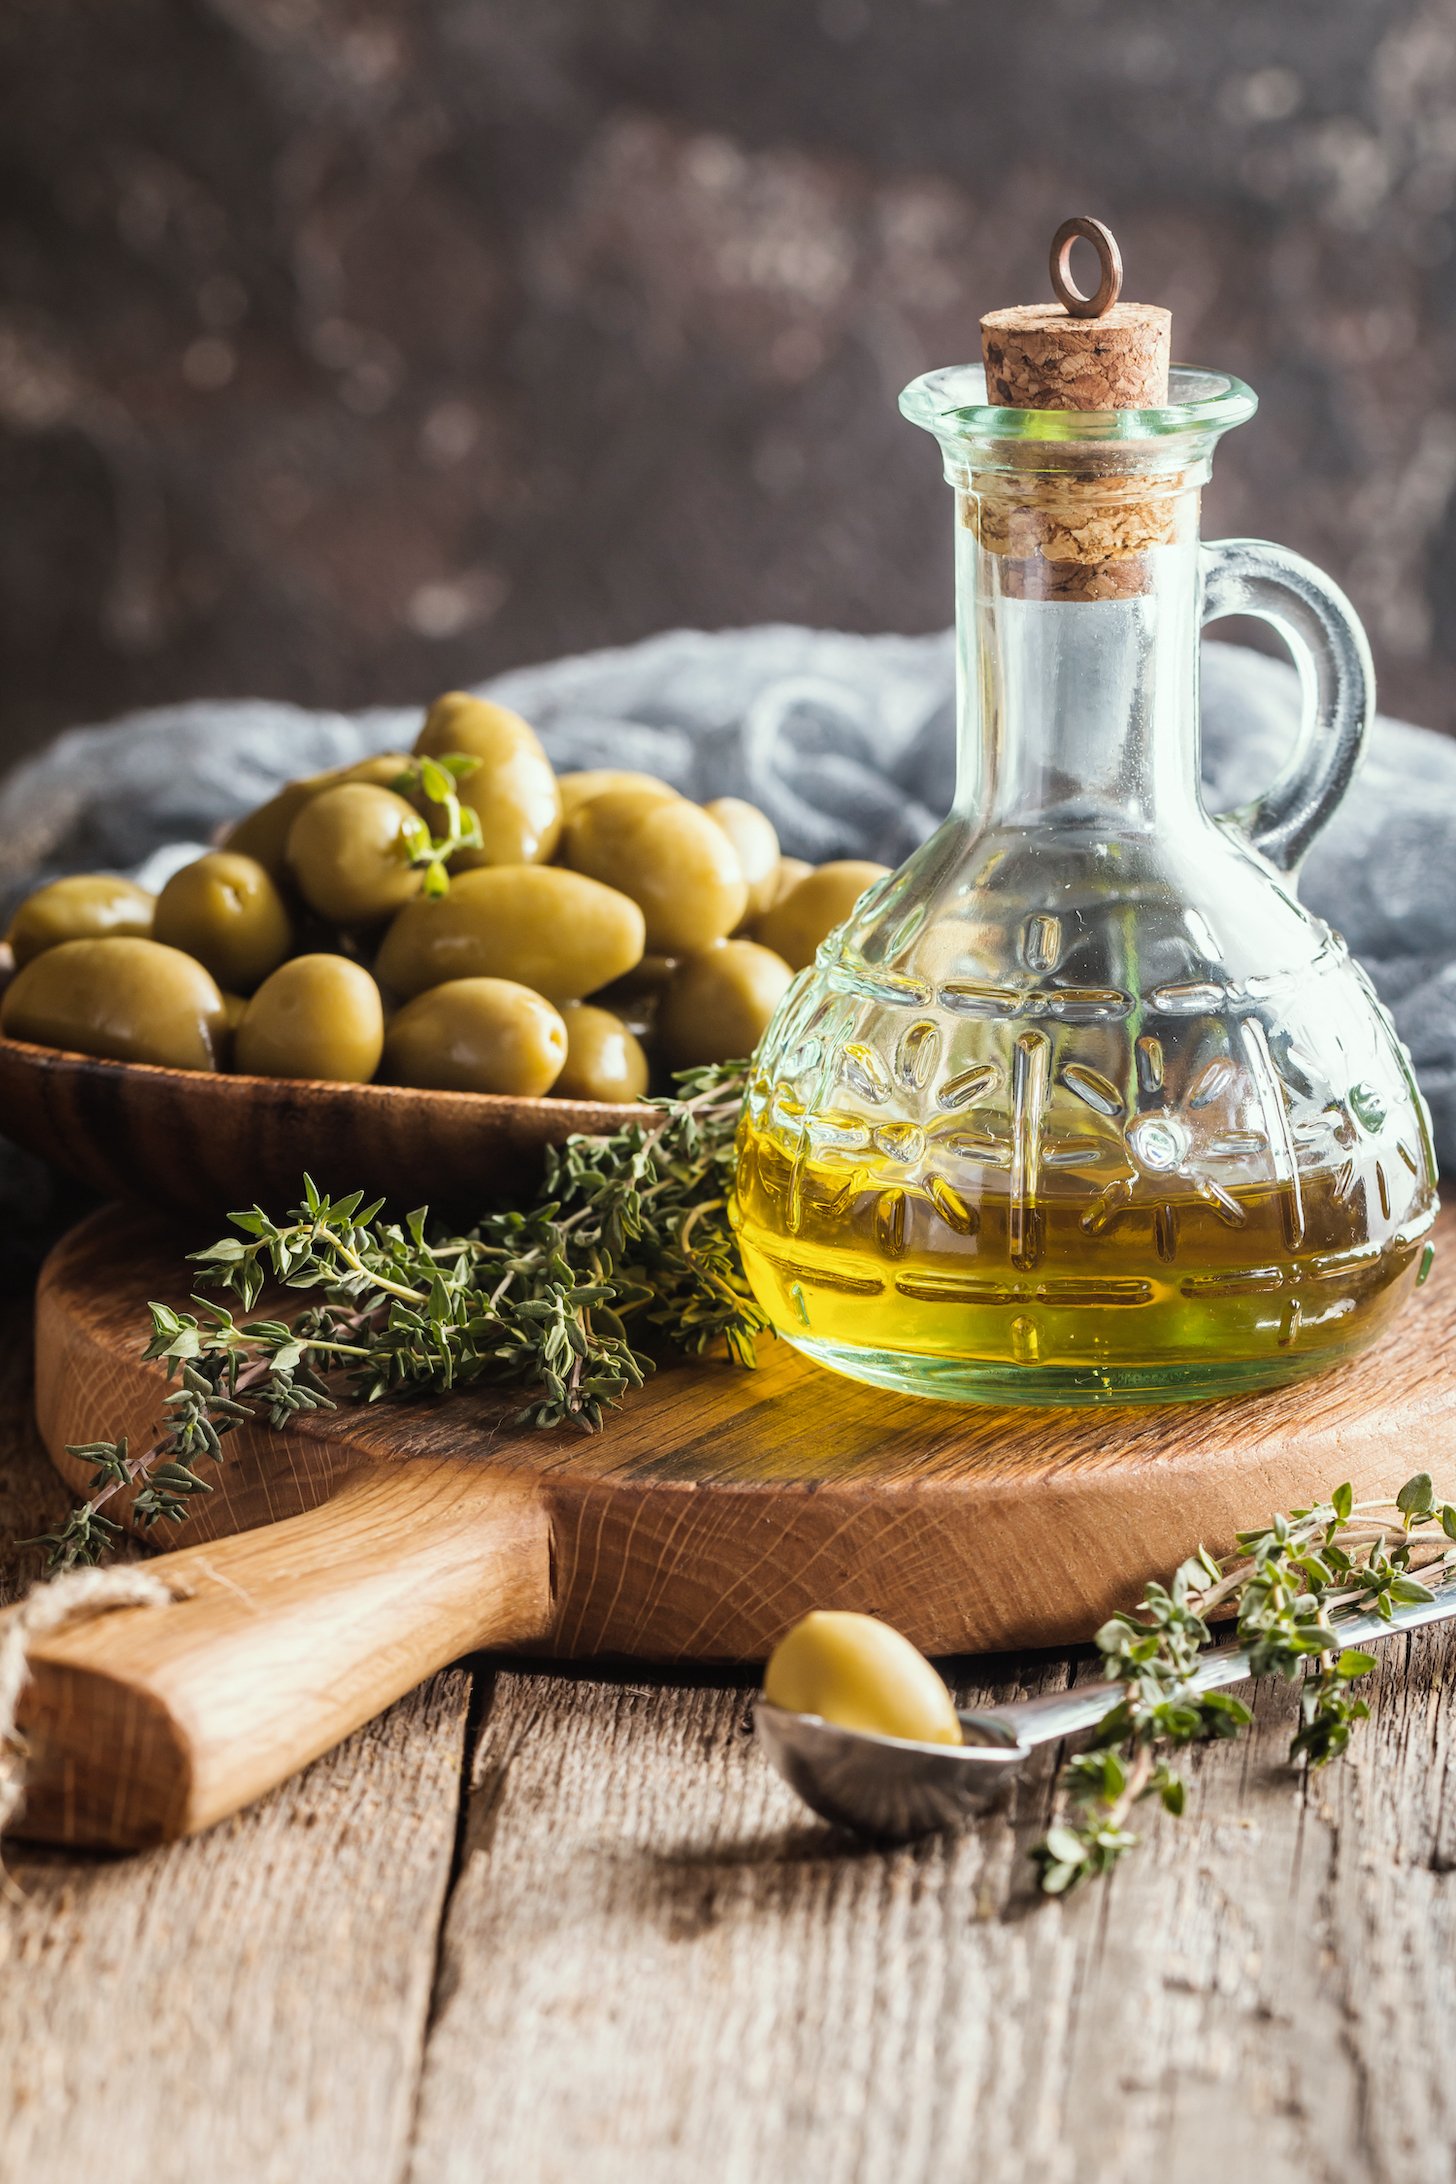 Olive oil and bowl of olives on the wooden table